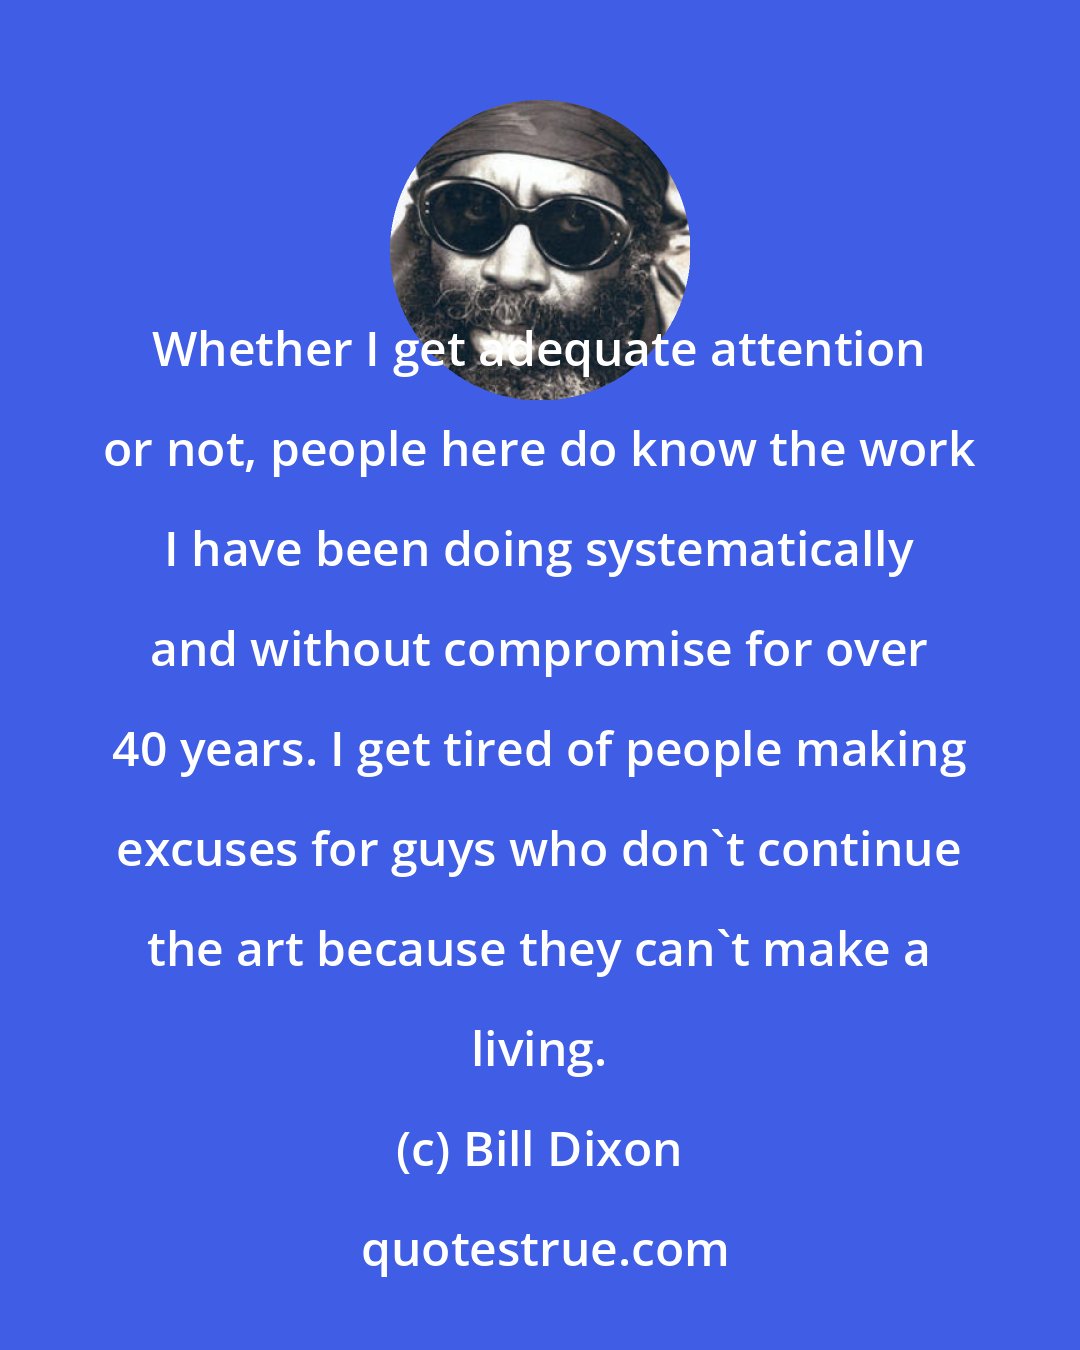 Bill Dixon: Whether I get adequate attention or not, people here do know the work I have been doing systematically and without compromise for over 40 years. I get tired of people making excuses for guys who don't continue the art because they can't make a living.